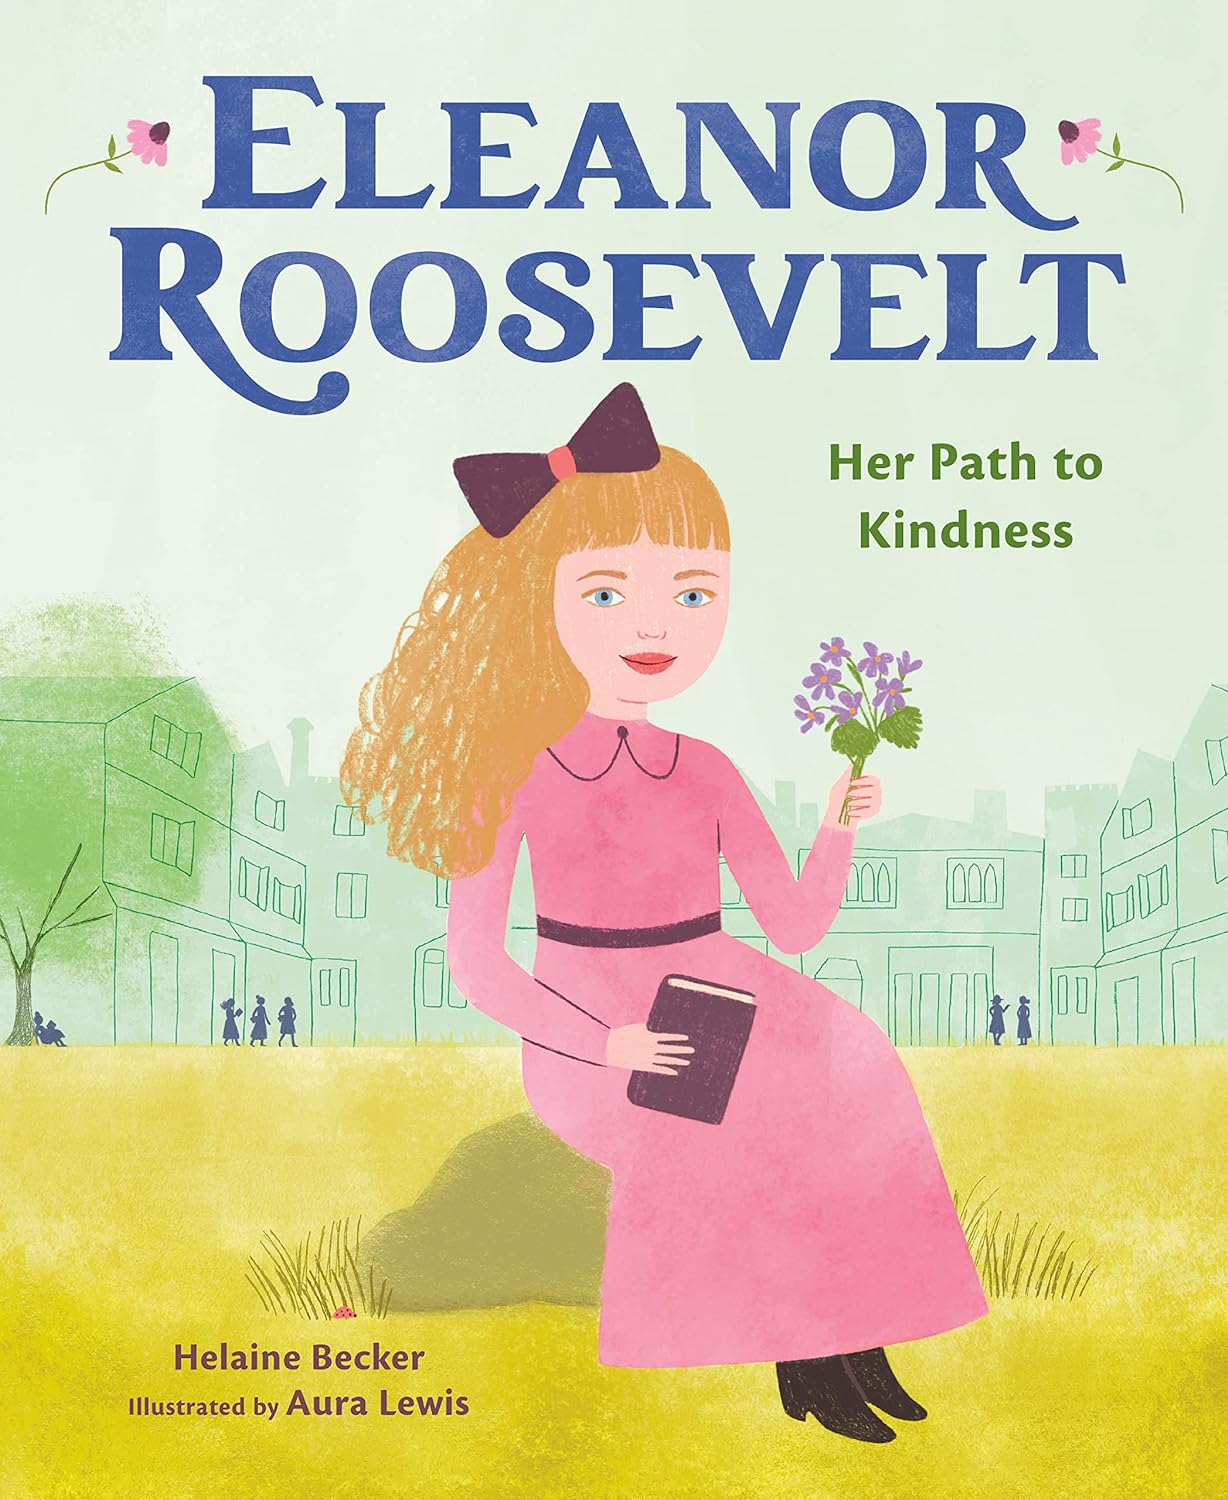 Eleanor Roosevelt: Her Path to Kindness (Hardcover)